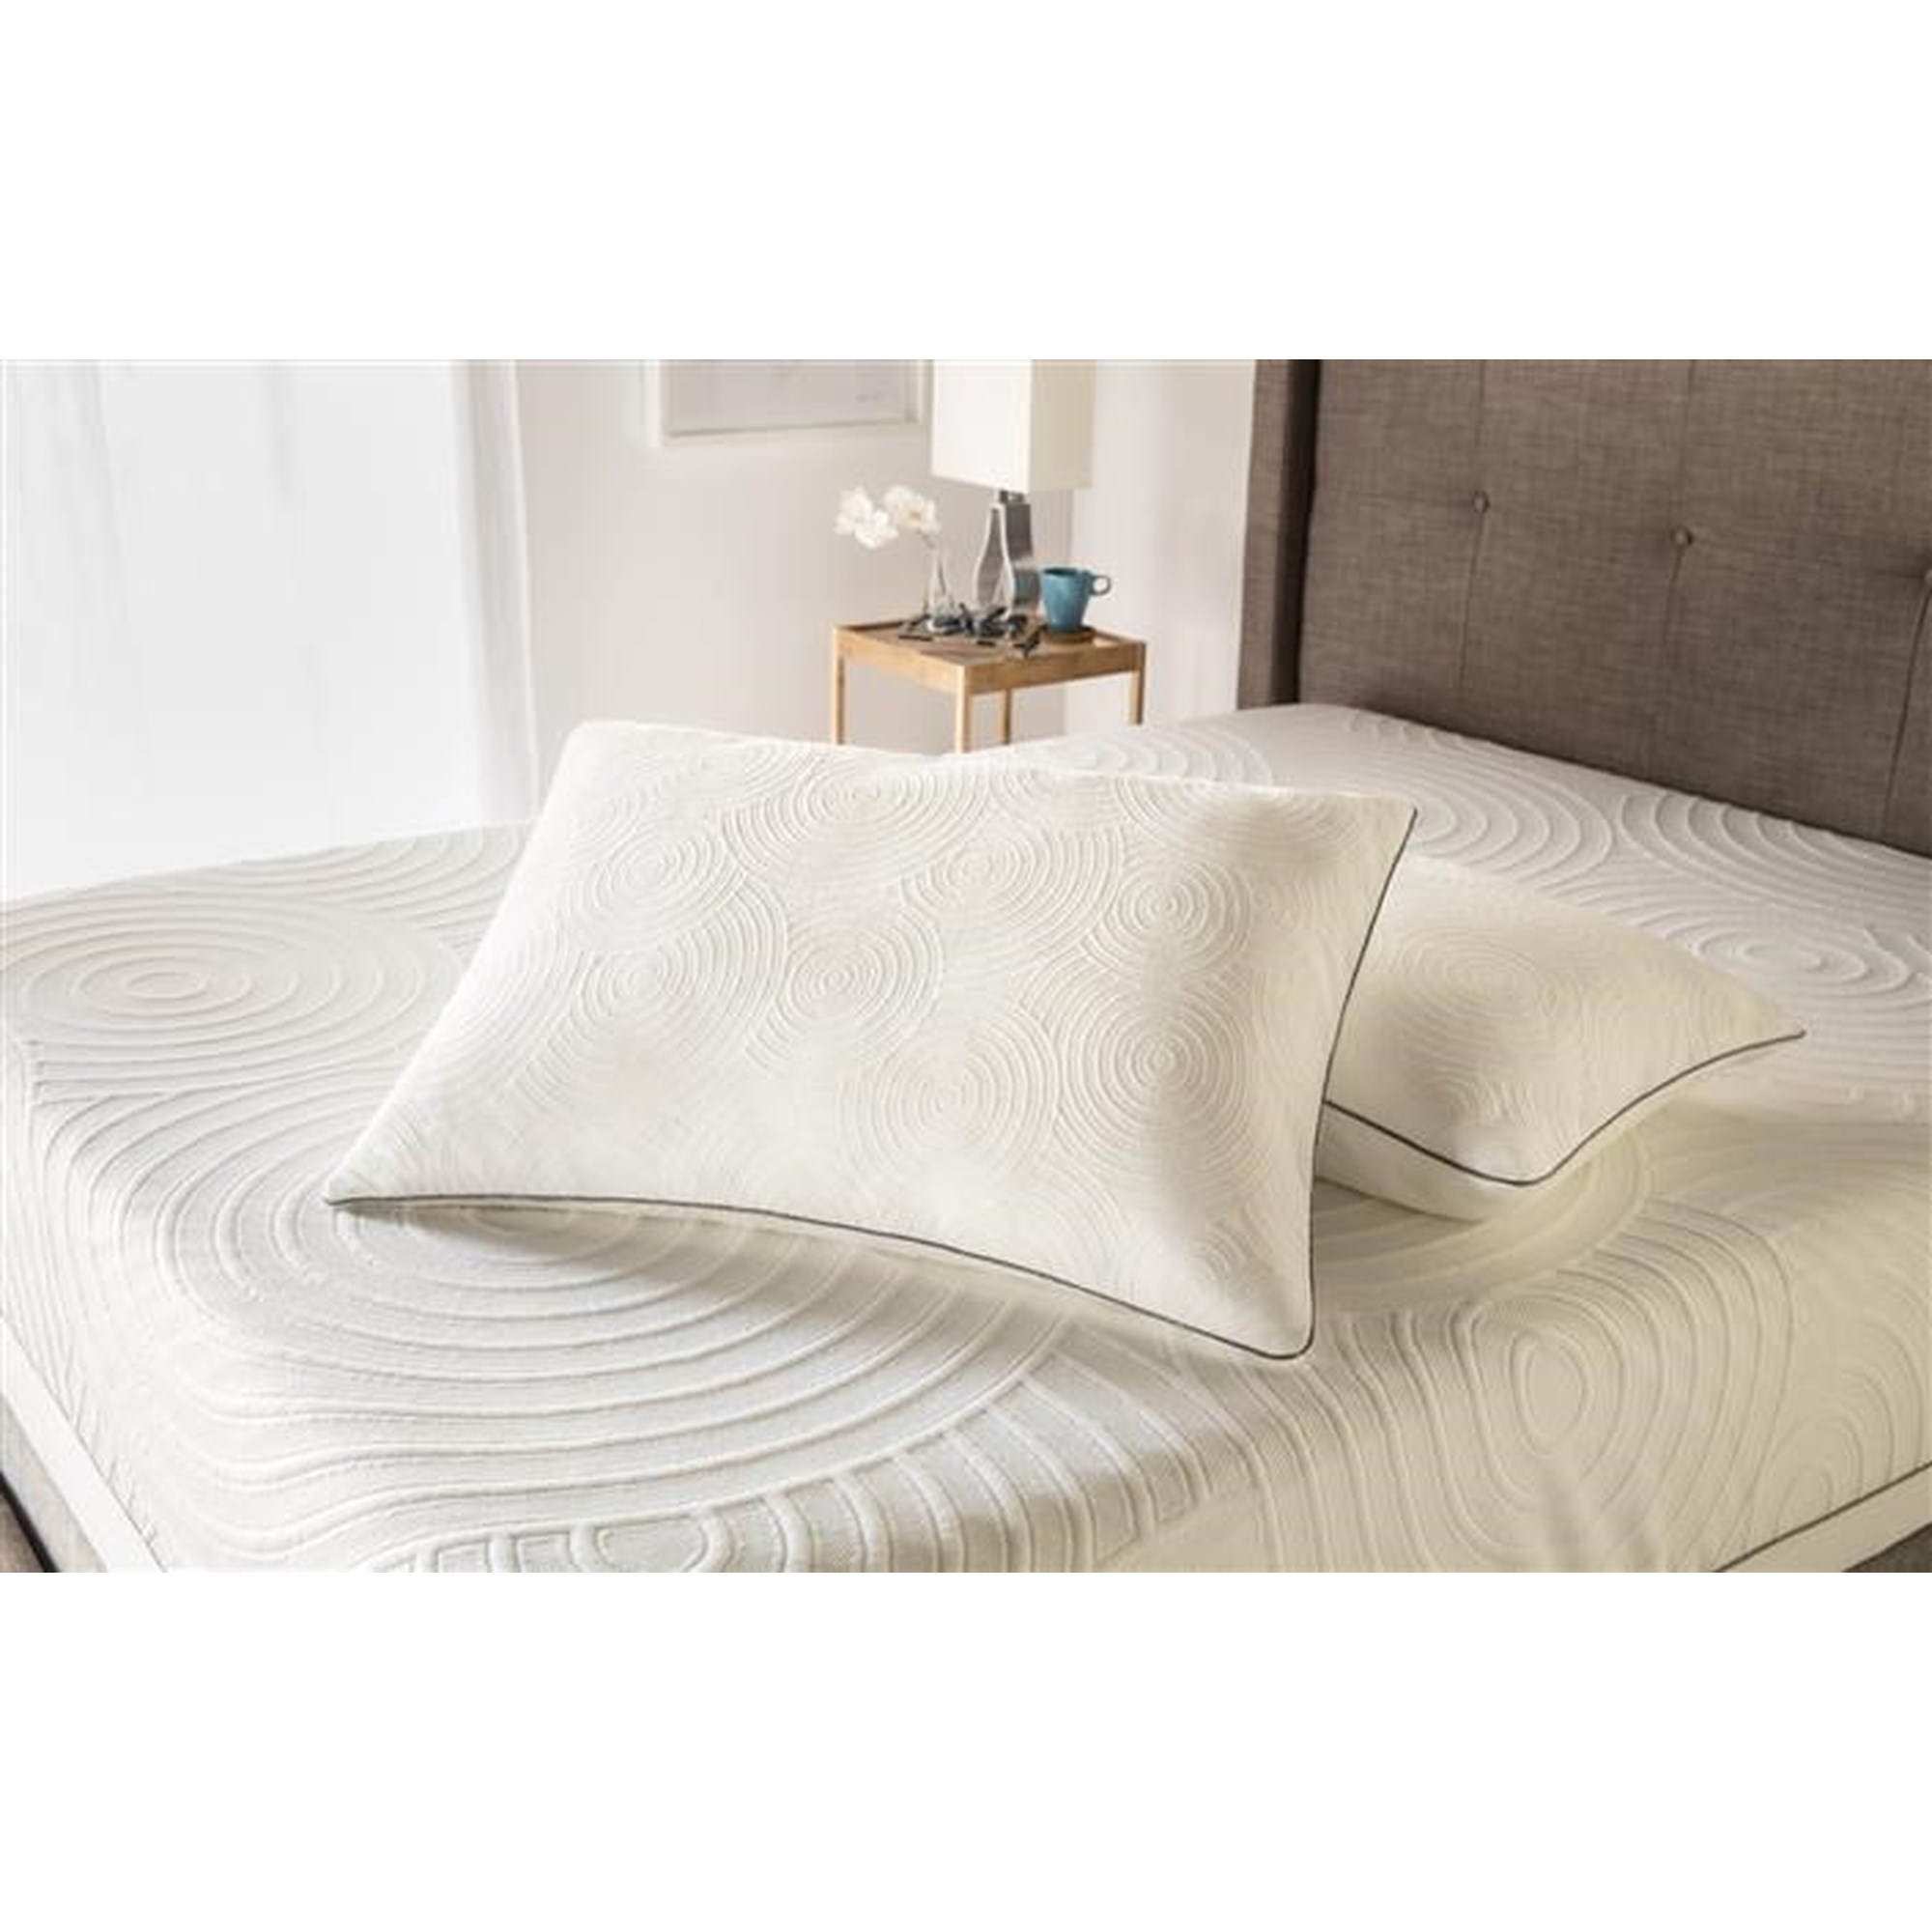 https://imageresizer4.furnituredealer.net/img/remote/images.furnituredealer.net/img/products%2Ftempur-pedic%2Fcolor%2Ftempur-protect%20pillow%20protectors_45714121-b3fkyf7riaemt0hglys1uvq.jpg?width=2000&height=2000&scale=both